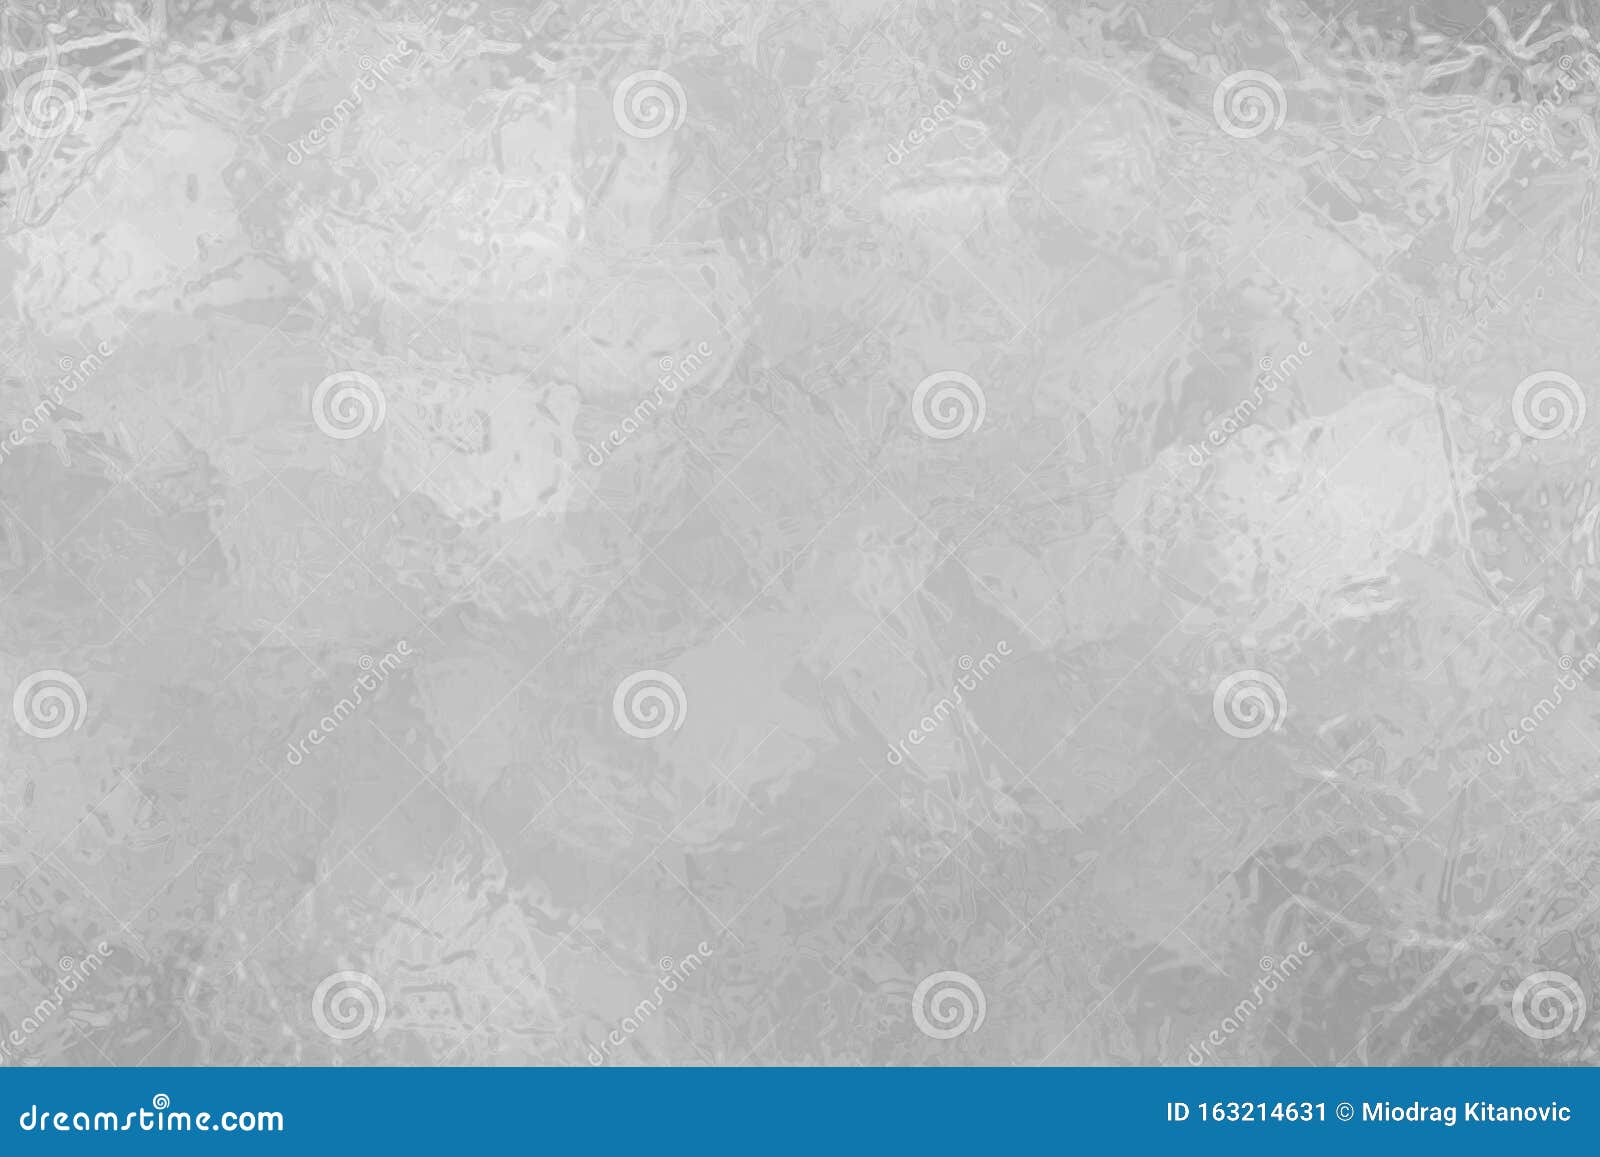 Abstract Ice Crystal Background Stock Image - Image of illusion ...